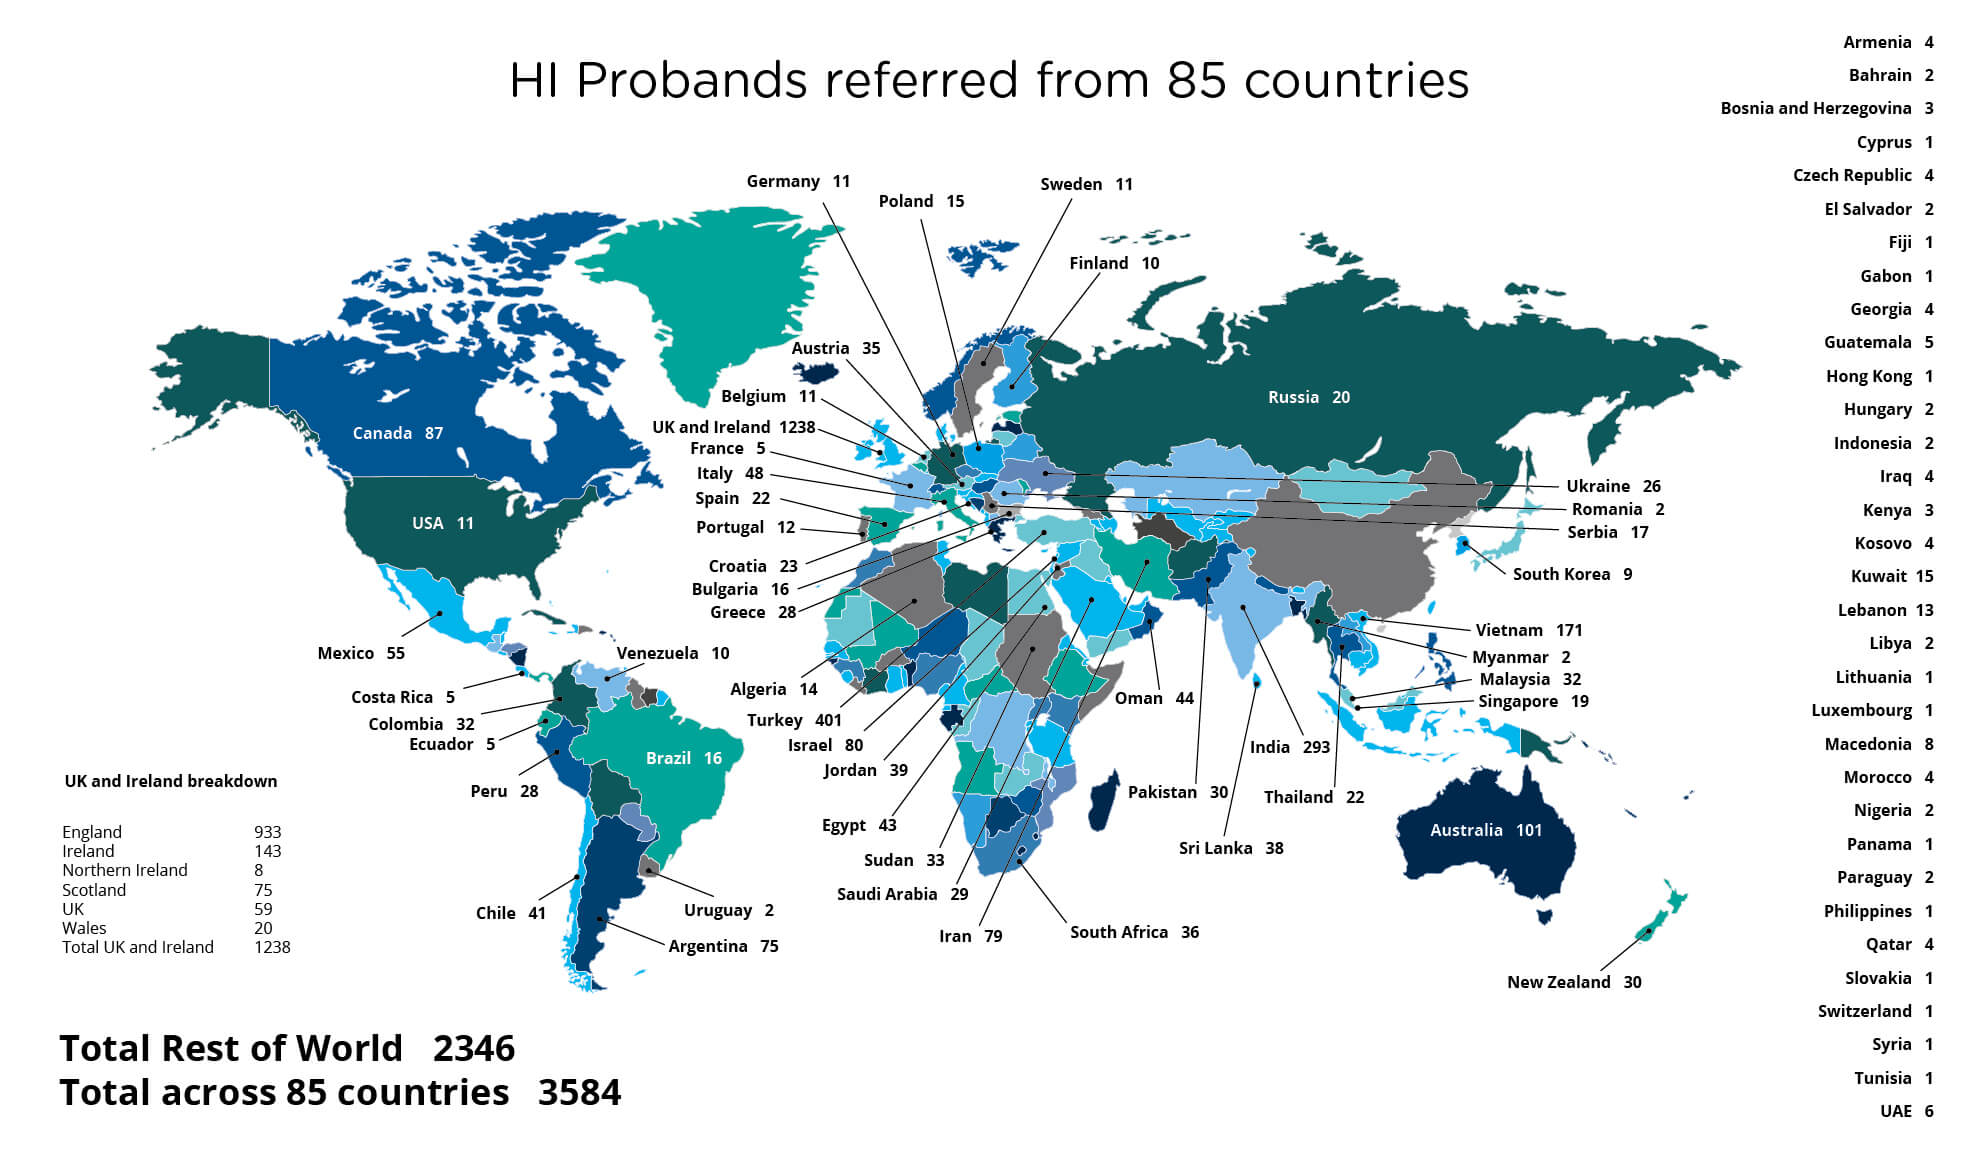 HI probands referred from 85 countries